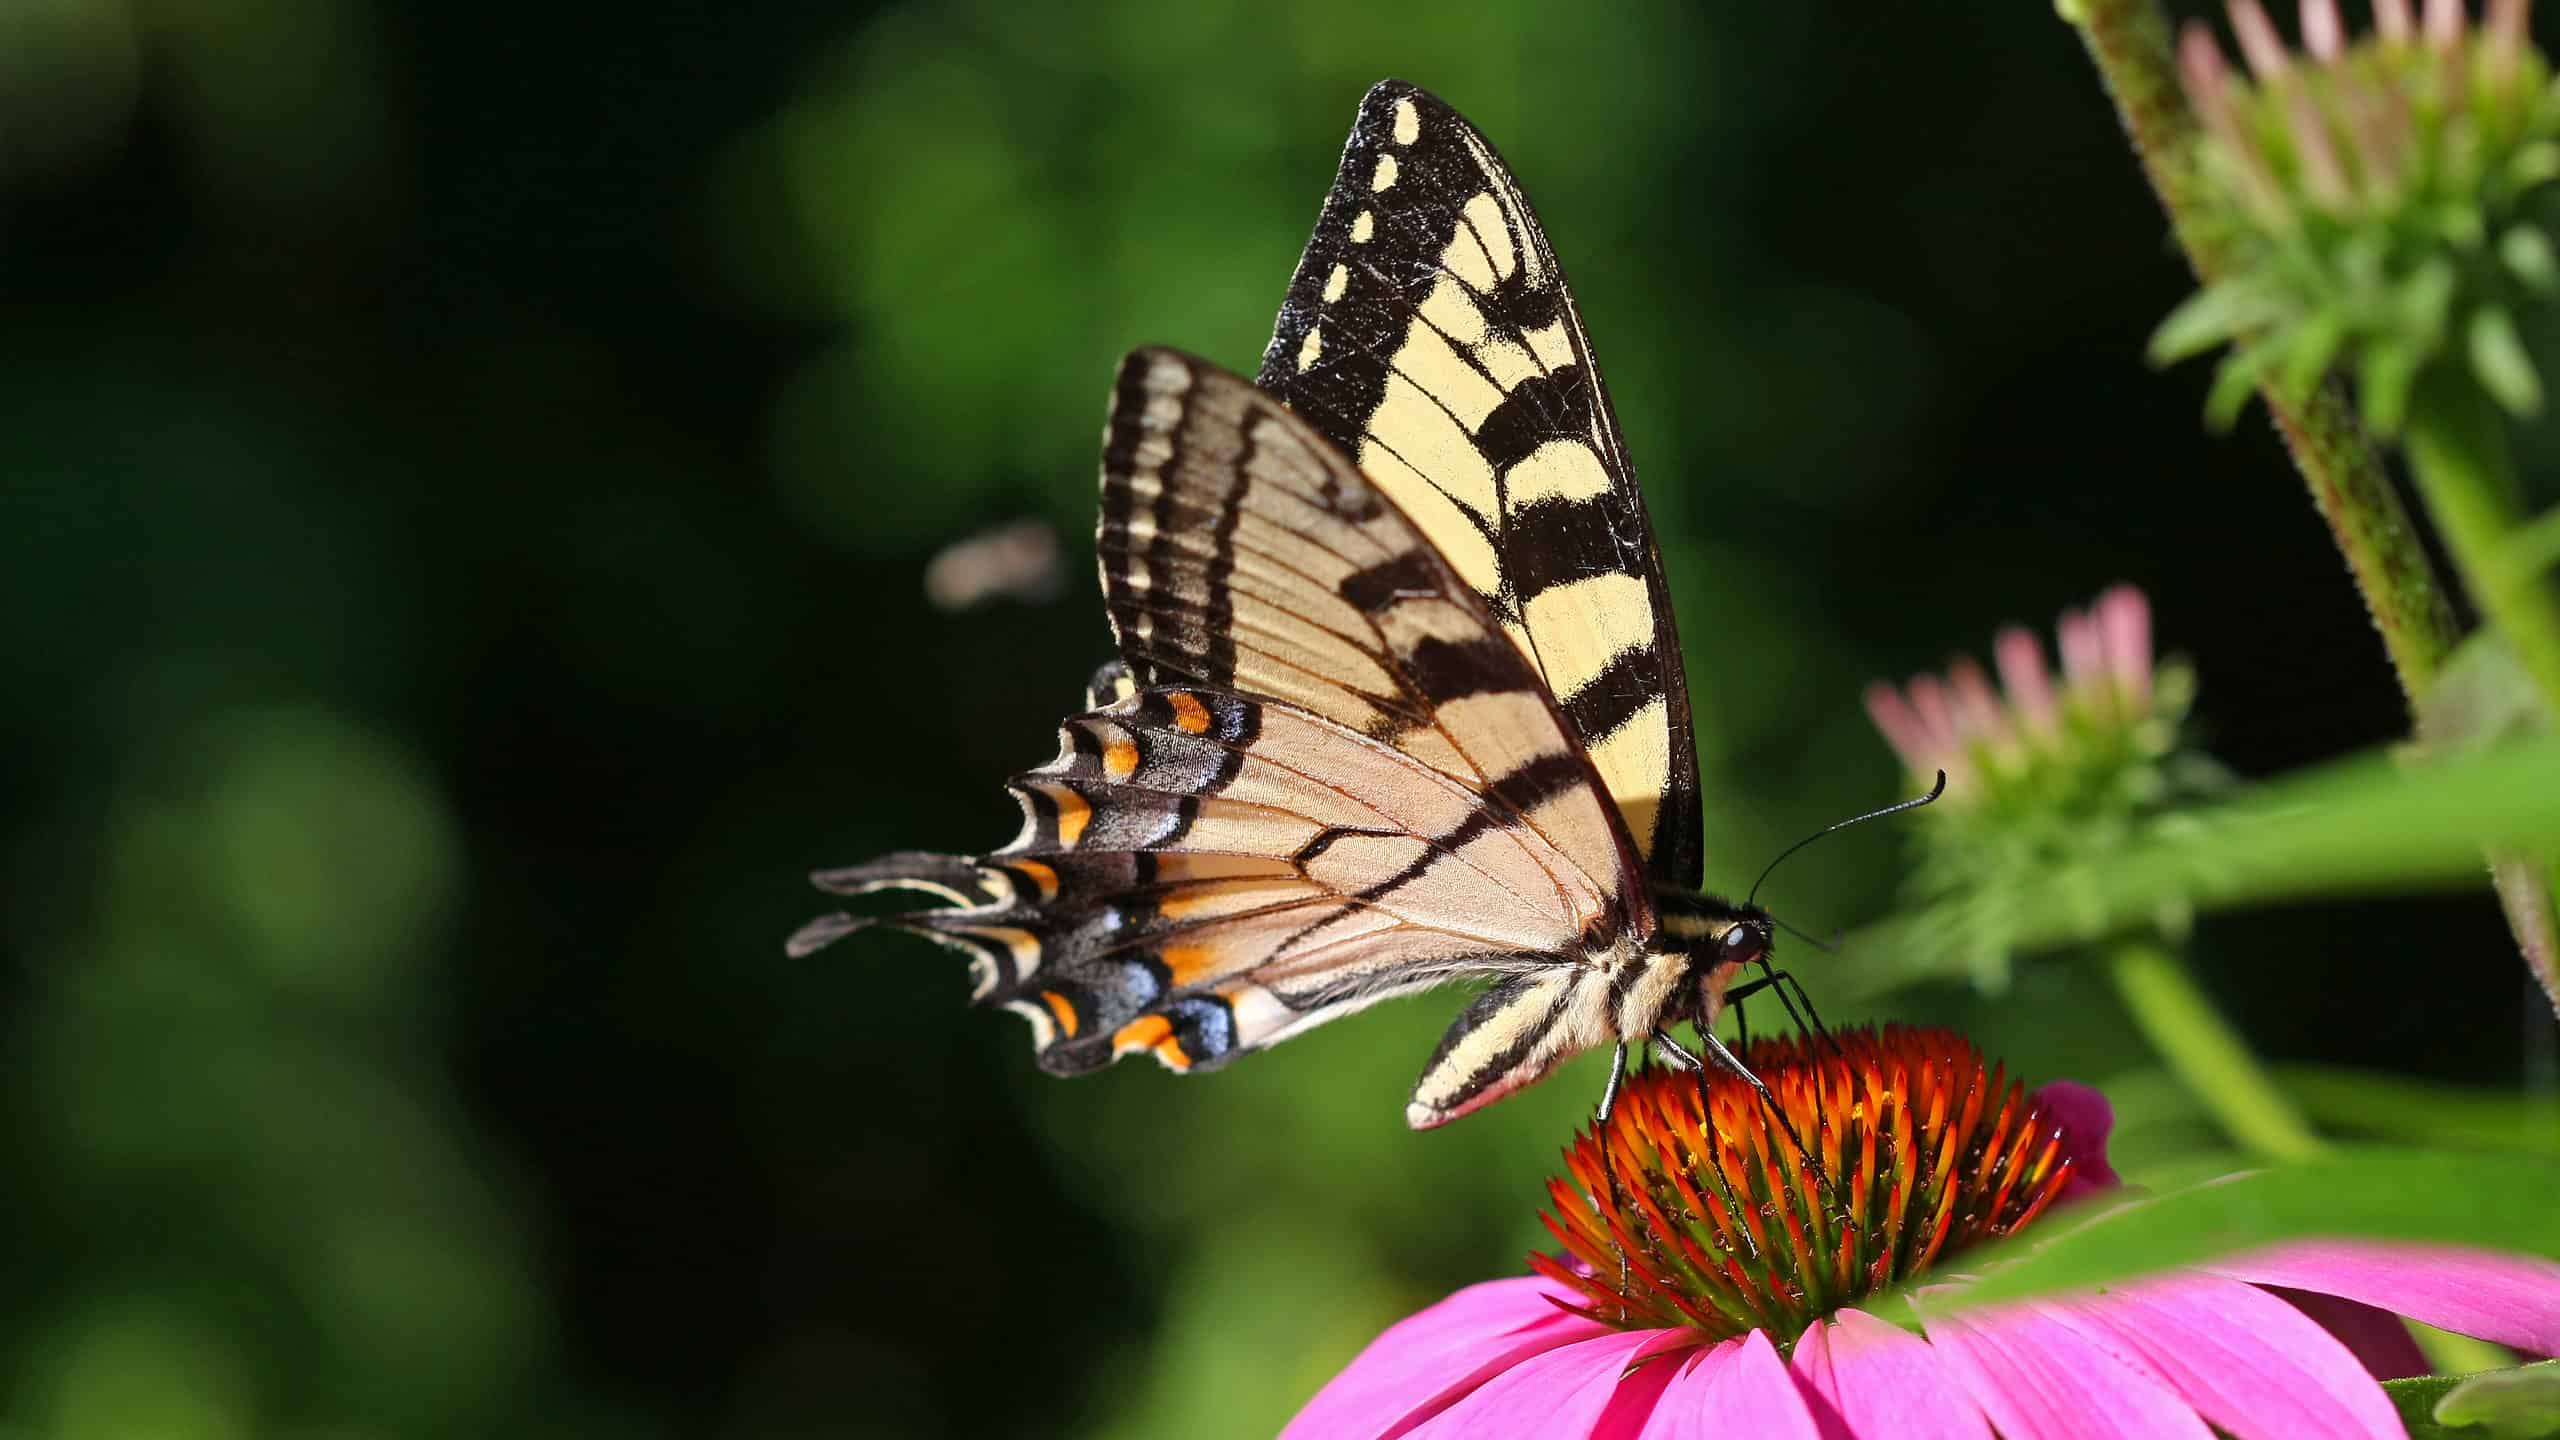 A photograph of an Eastern tiger swallowtail feeding from a purple coneflower